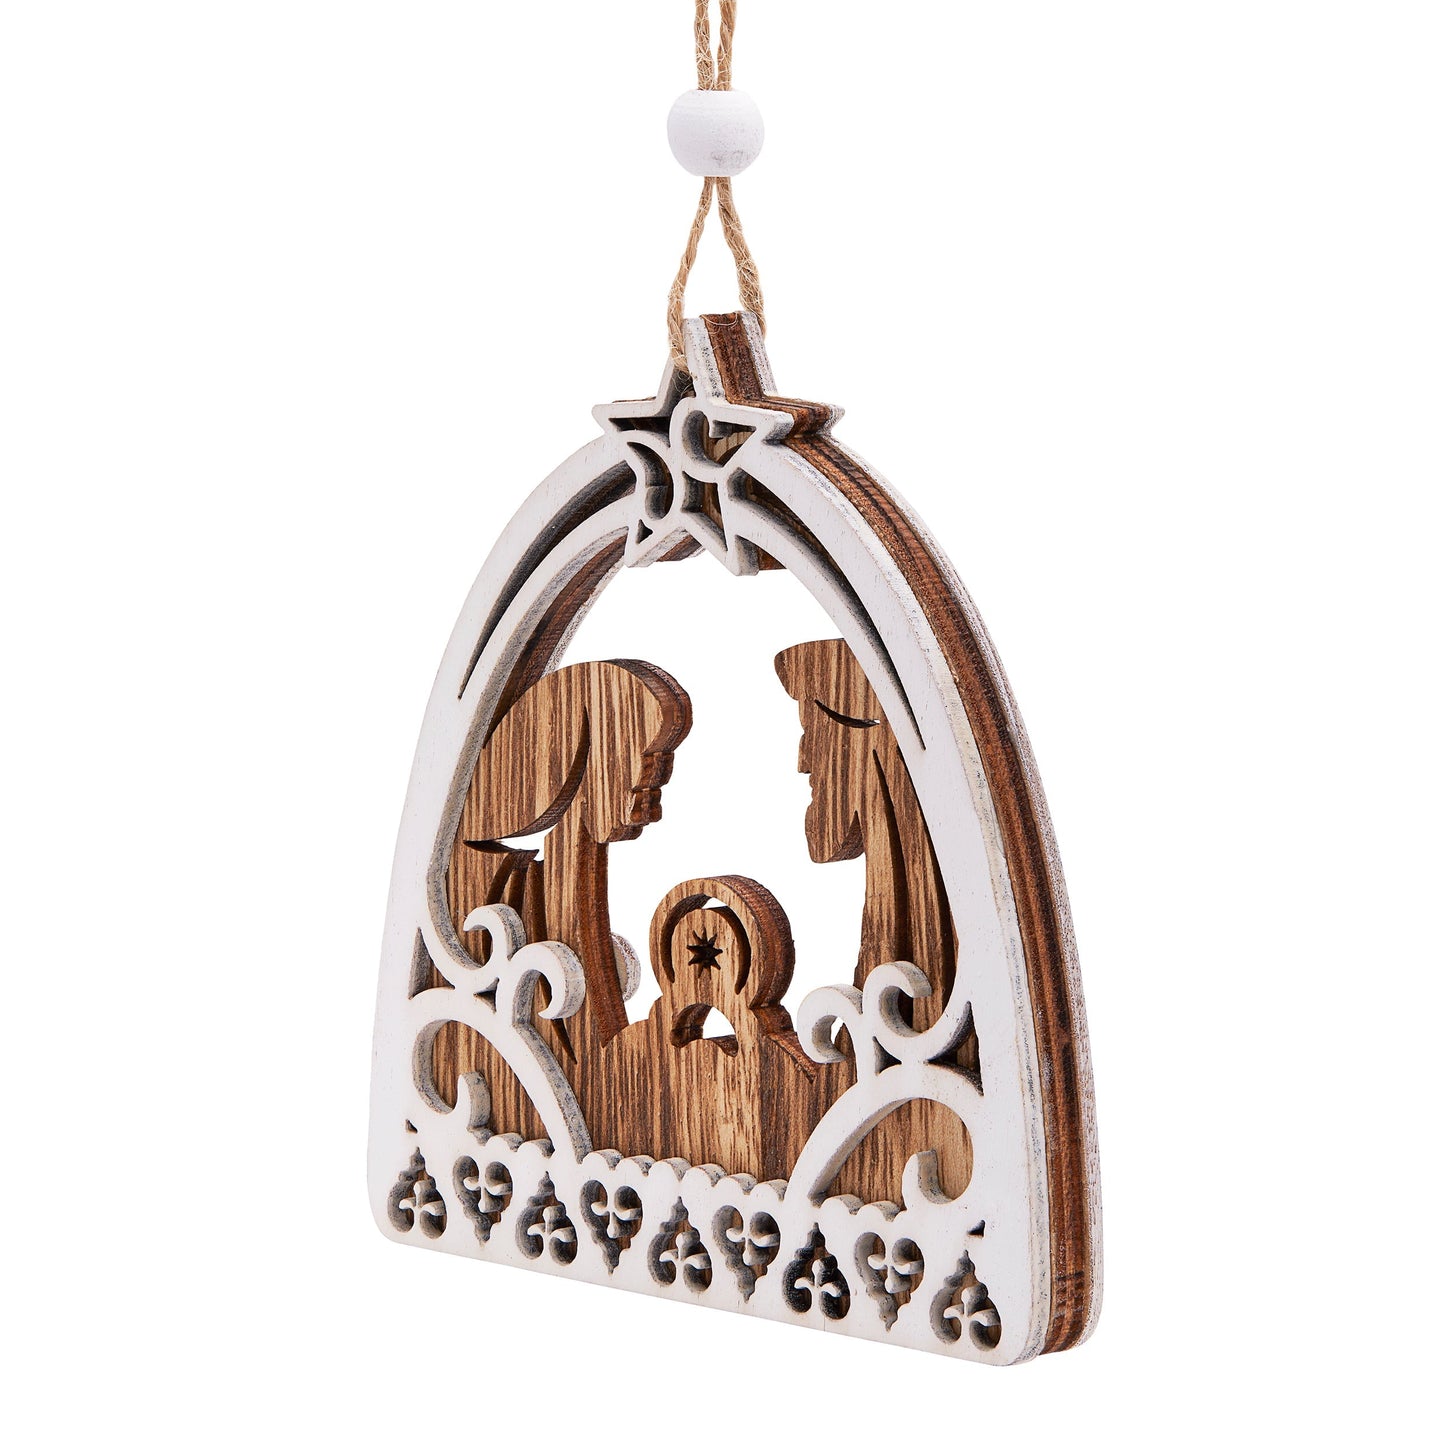 Mondo Cattolico Wooden Christmas Decoration in the Shape of a Hut With Nativity Scene